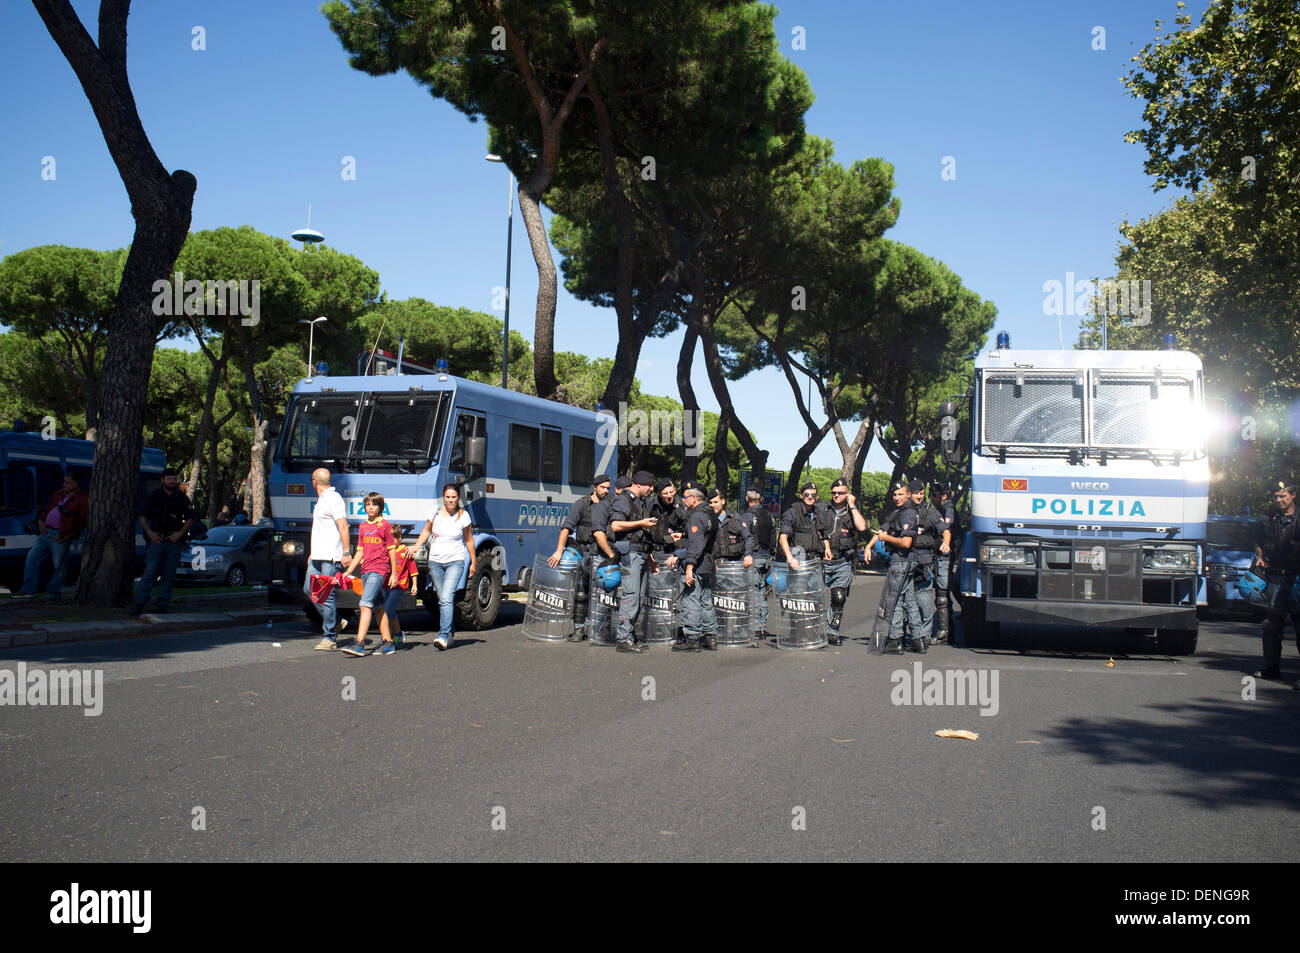 Rome Italy. 22nd Sep, 2013. A large police presence as fans start to gather for the local derby match at the olympic stadium in Rome between AS Roma and Lazio football clubs which is traditionally one the fiercest sporting rivalries in Italian football Credit:  amer ghazzal/Alamy Live News Stock Photo